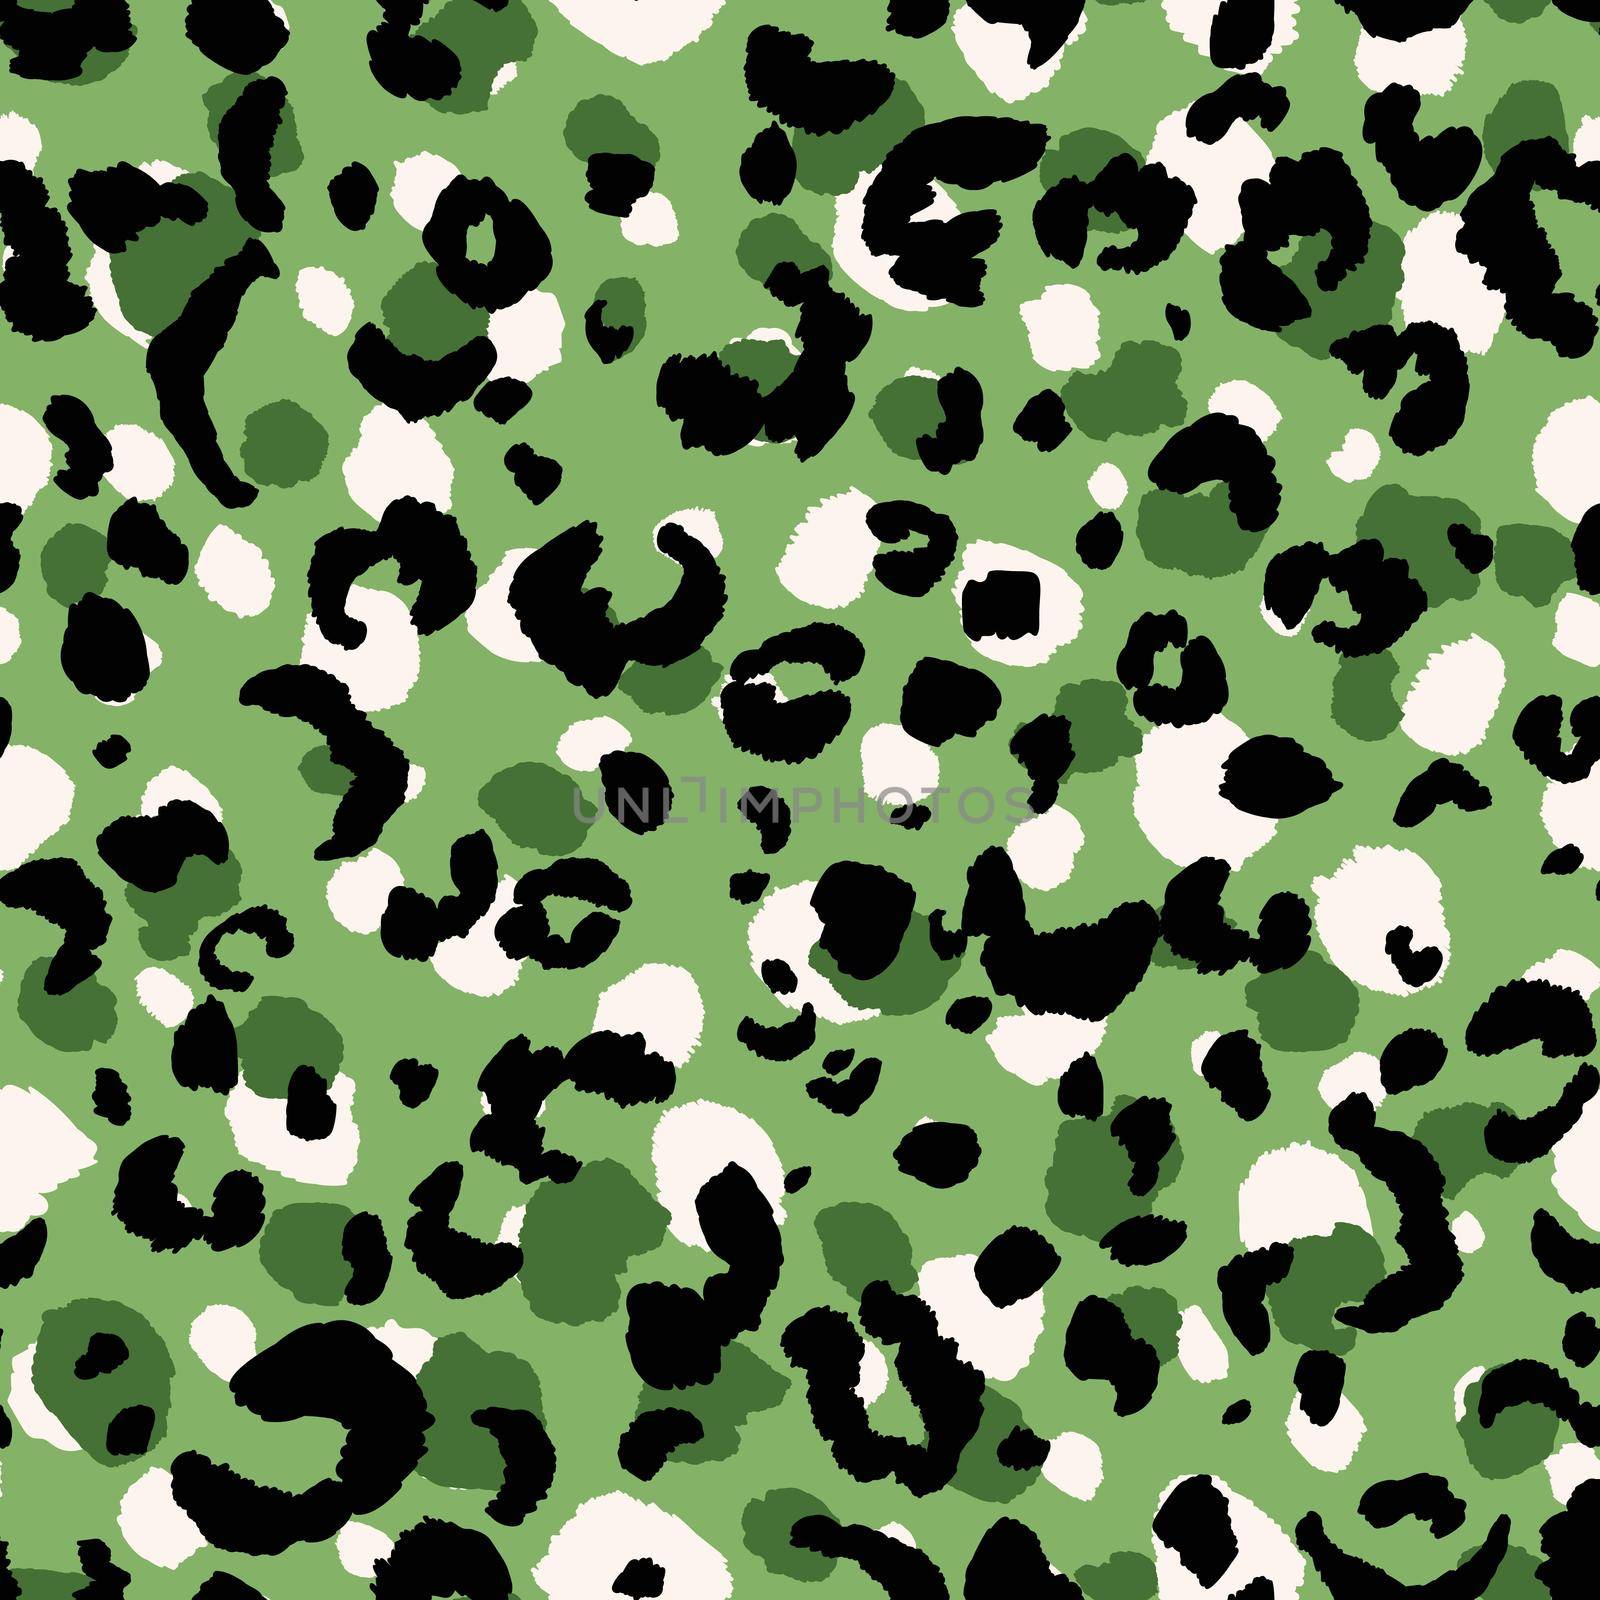 Abstract modern leopard seamless pattern. Animals trendy background. Green and black decorative vector stock illustration for print, card, postcard, fabric, textile. Modern ornament of stylized skin by allaku